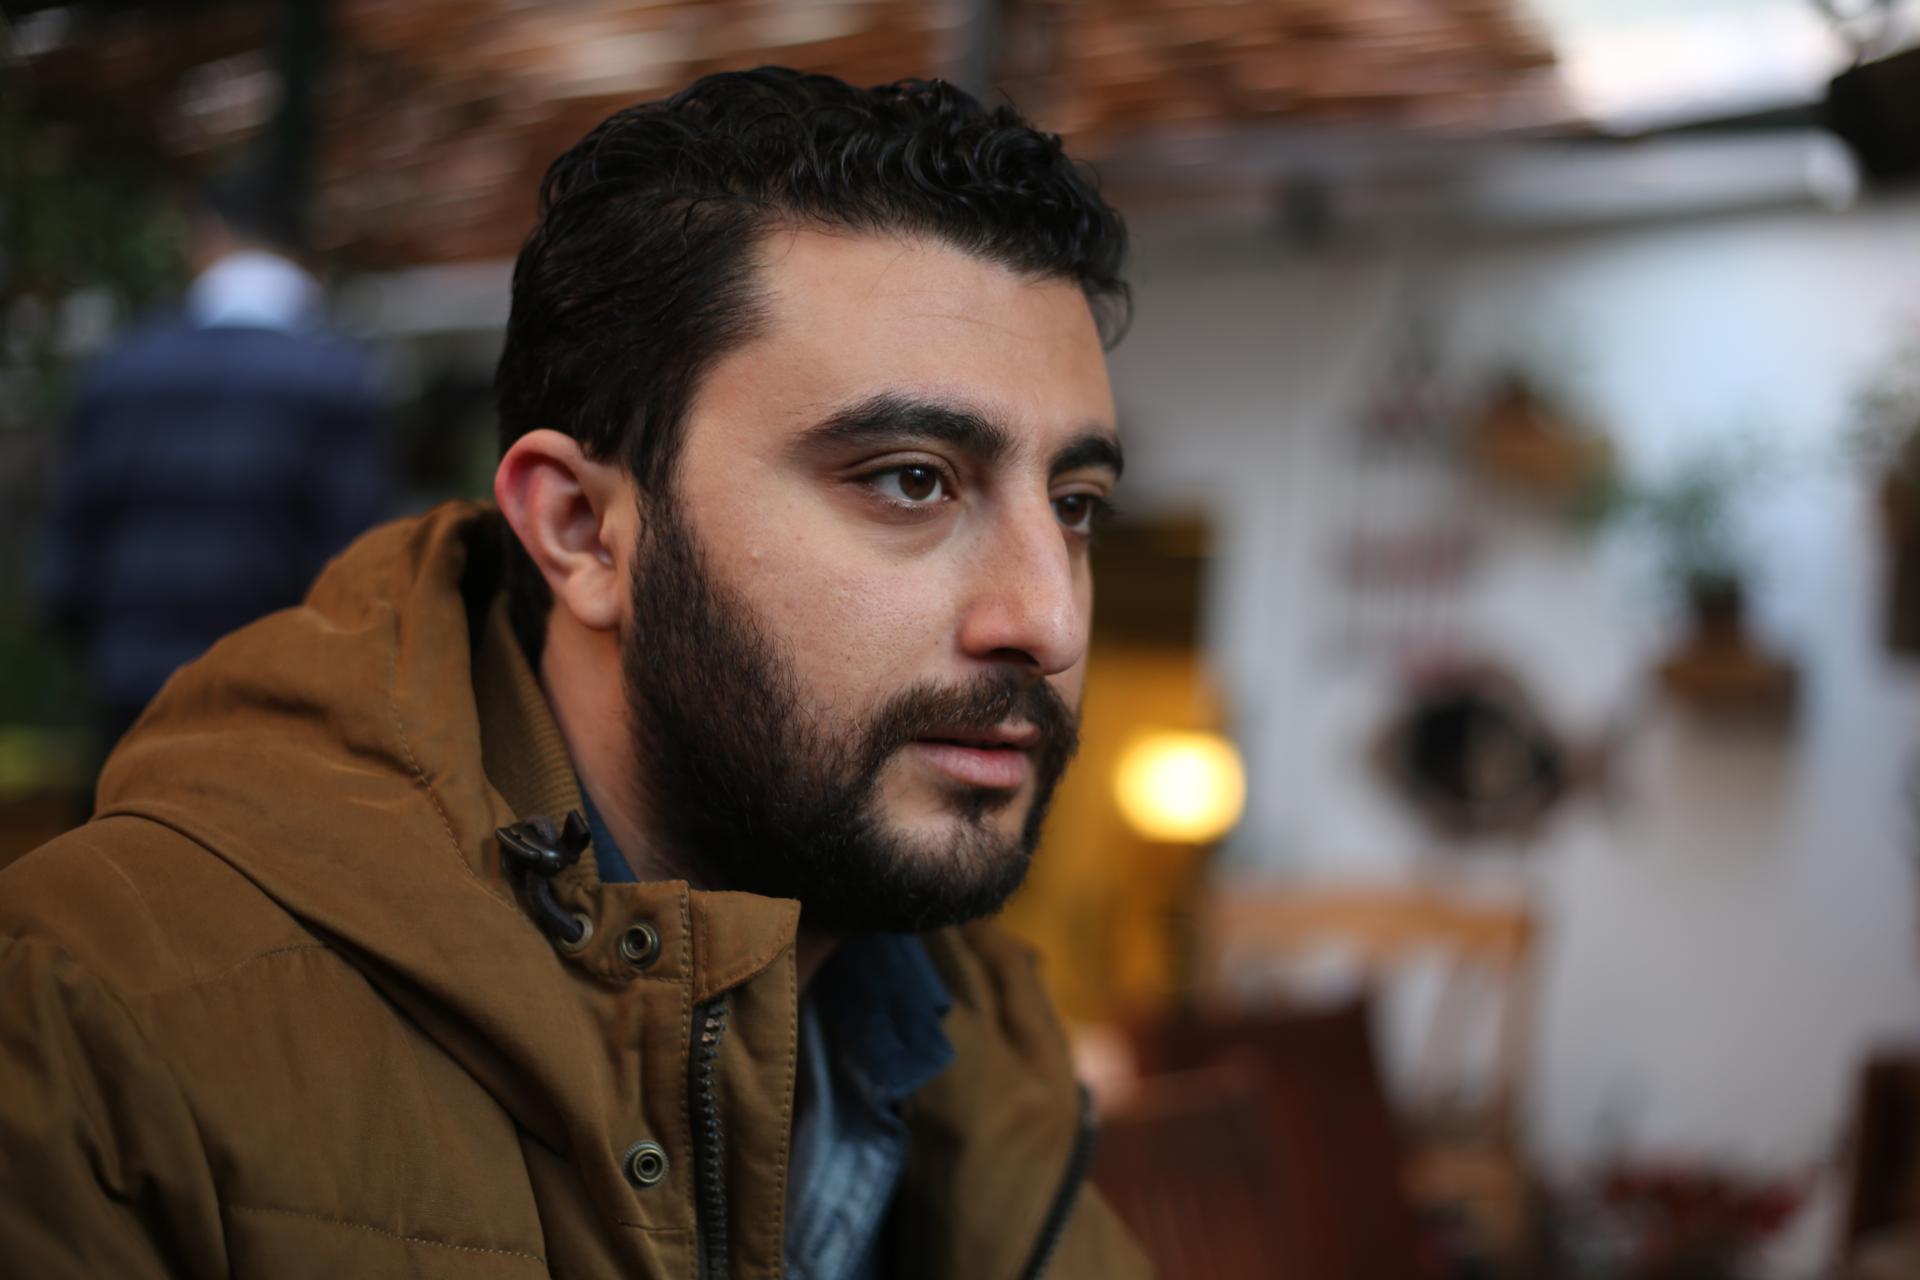 Mezar Matar escaped Raqqa in 2013 and he now lives in Istanbul.